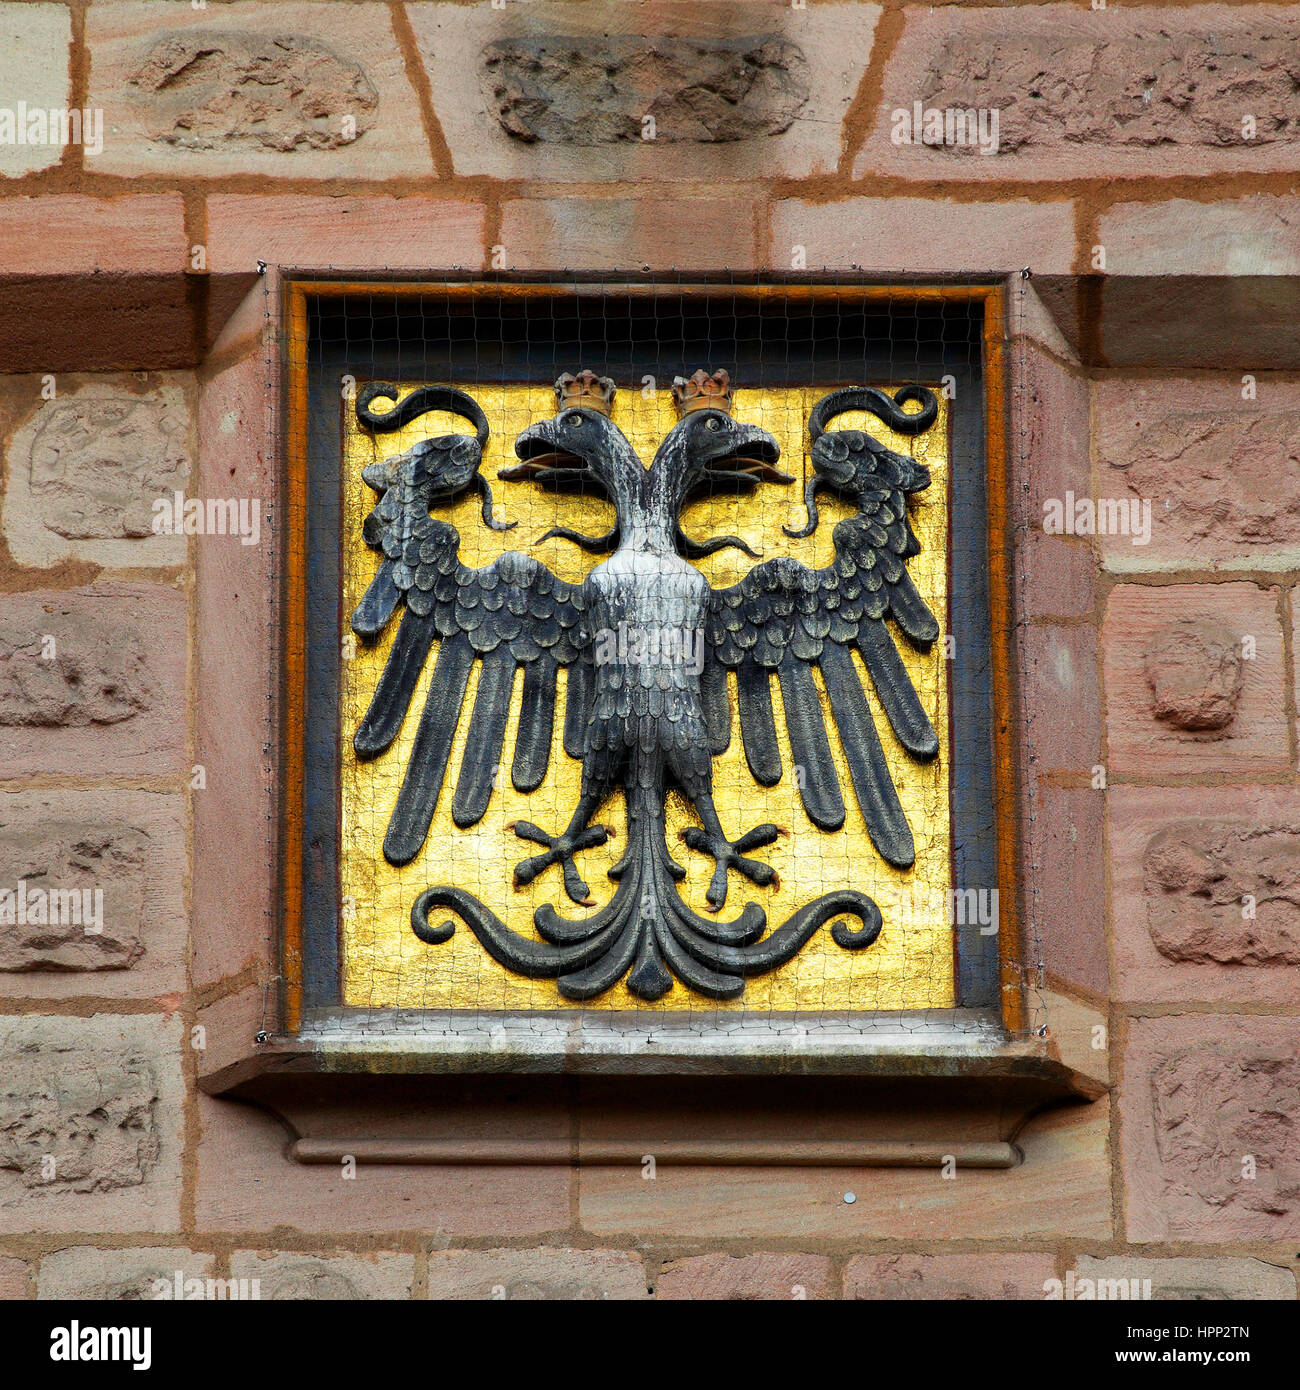 Coat of arms with two-headed eagle in Nuremberg, Germany Stock Photo